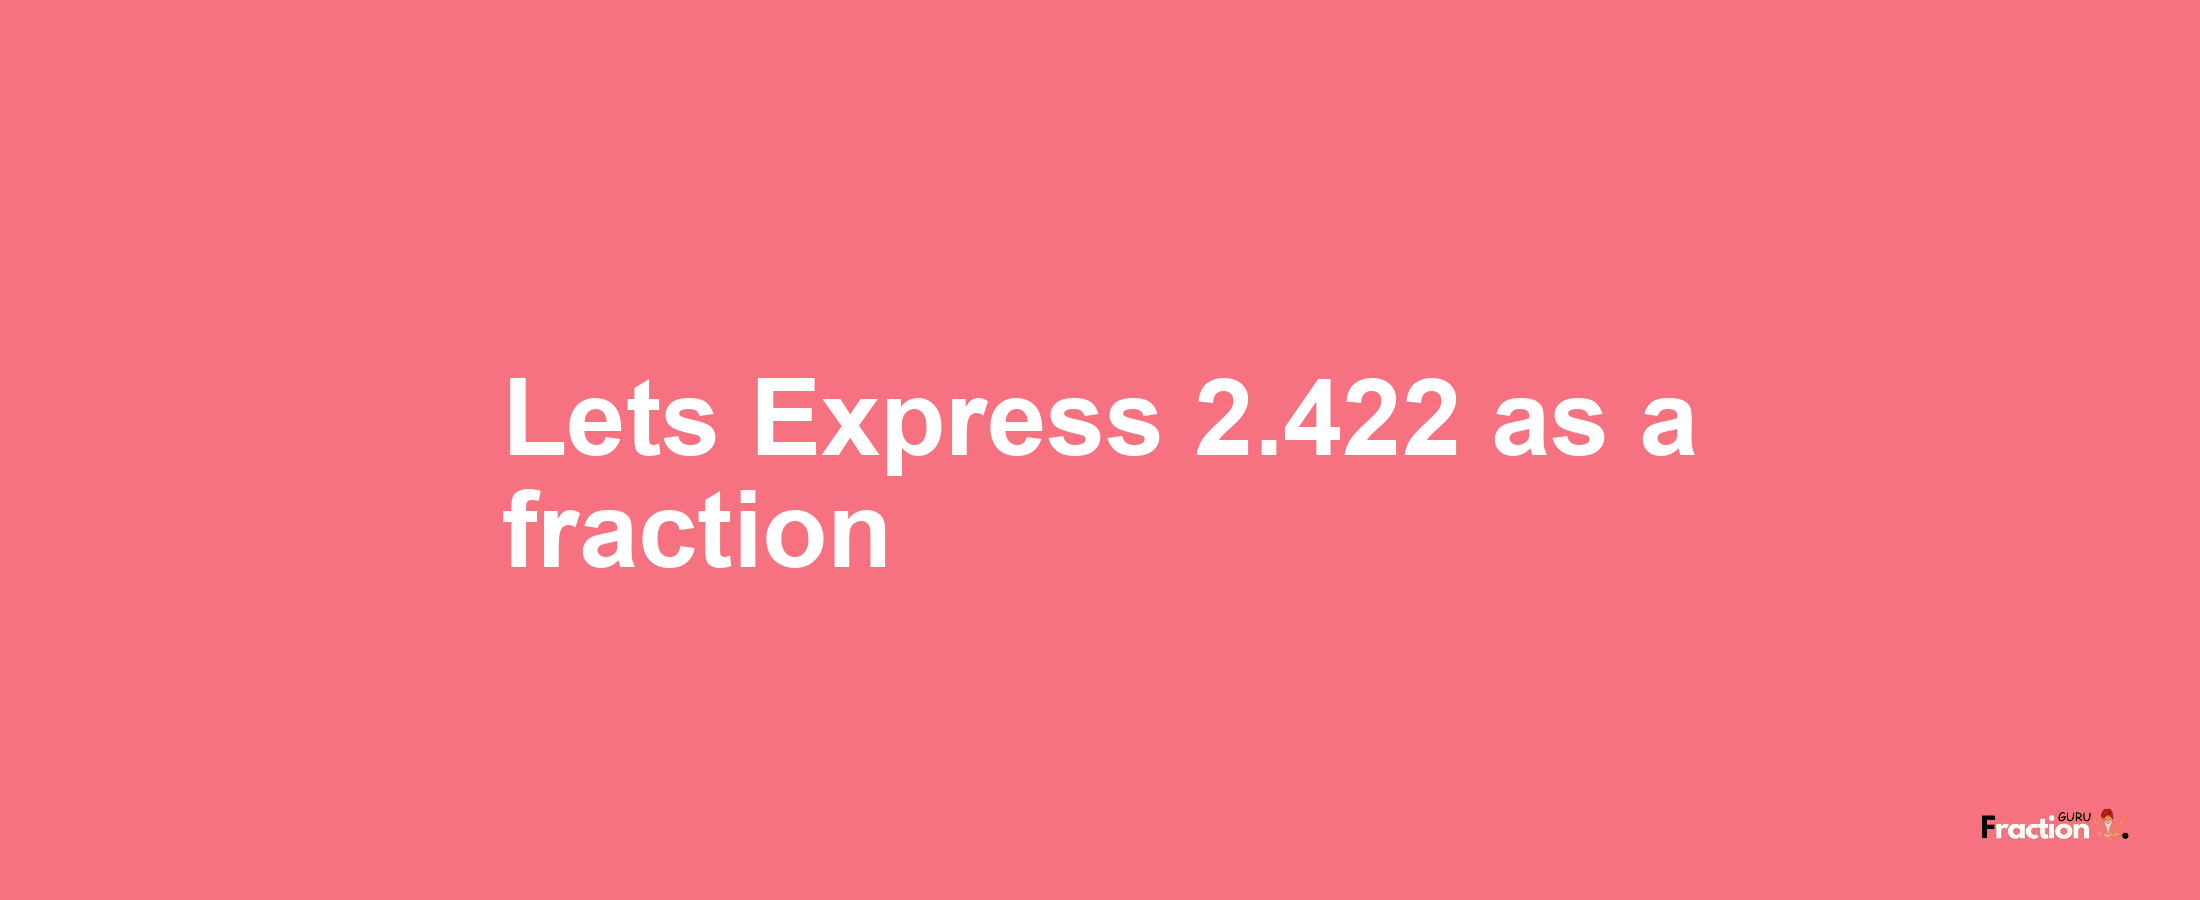 Lets Express 2.422 as afraction